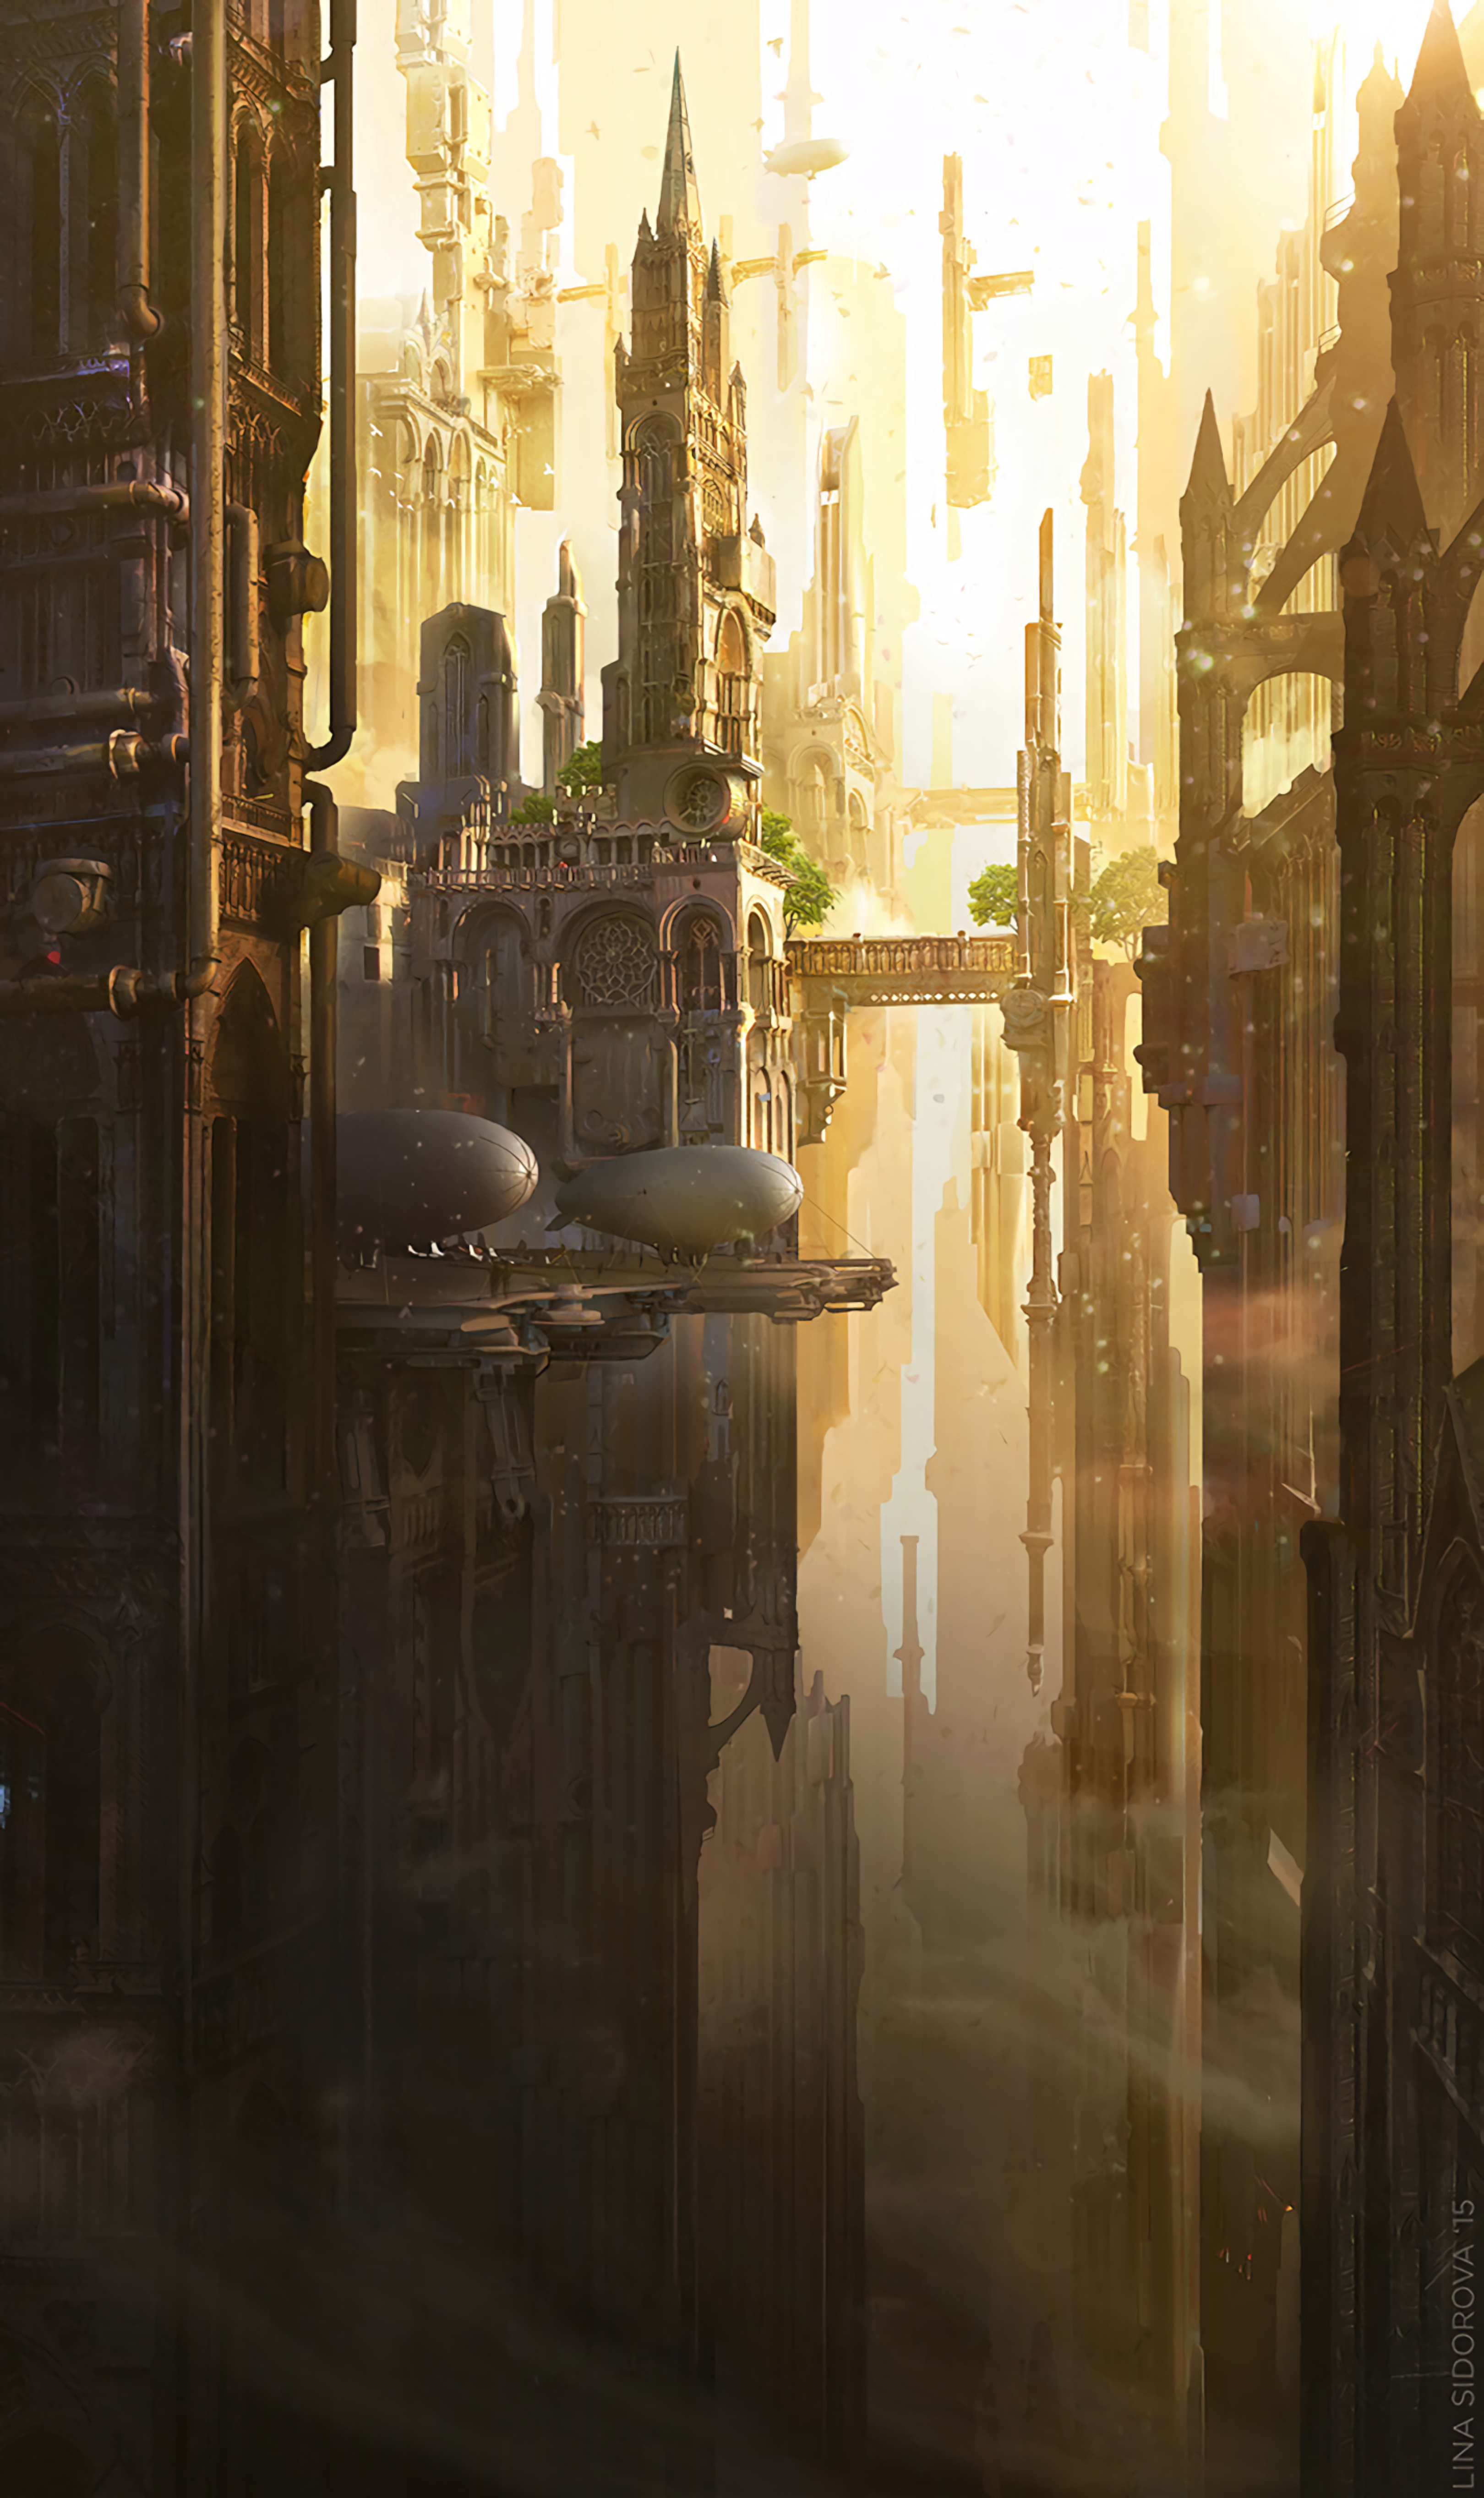 Full HD building, city, that's incredible, art, architecture, fiction, airships